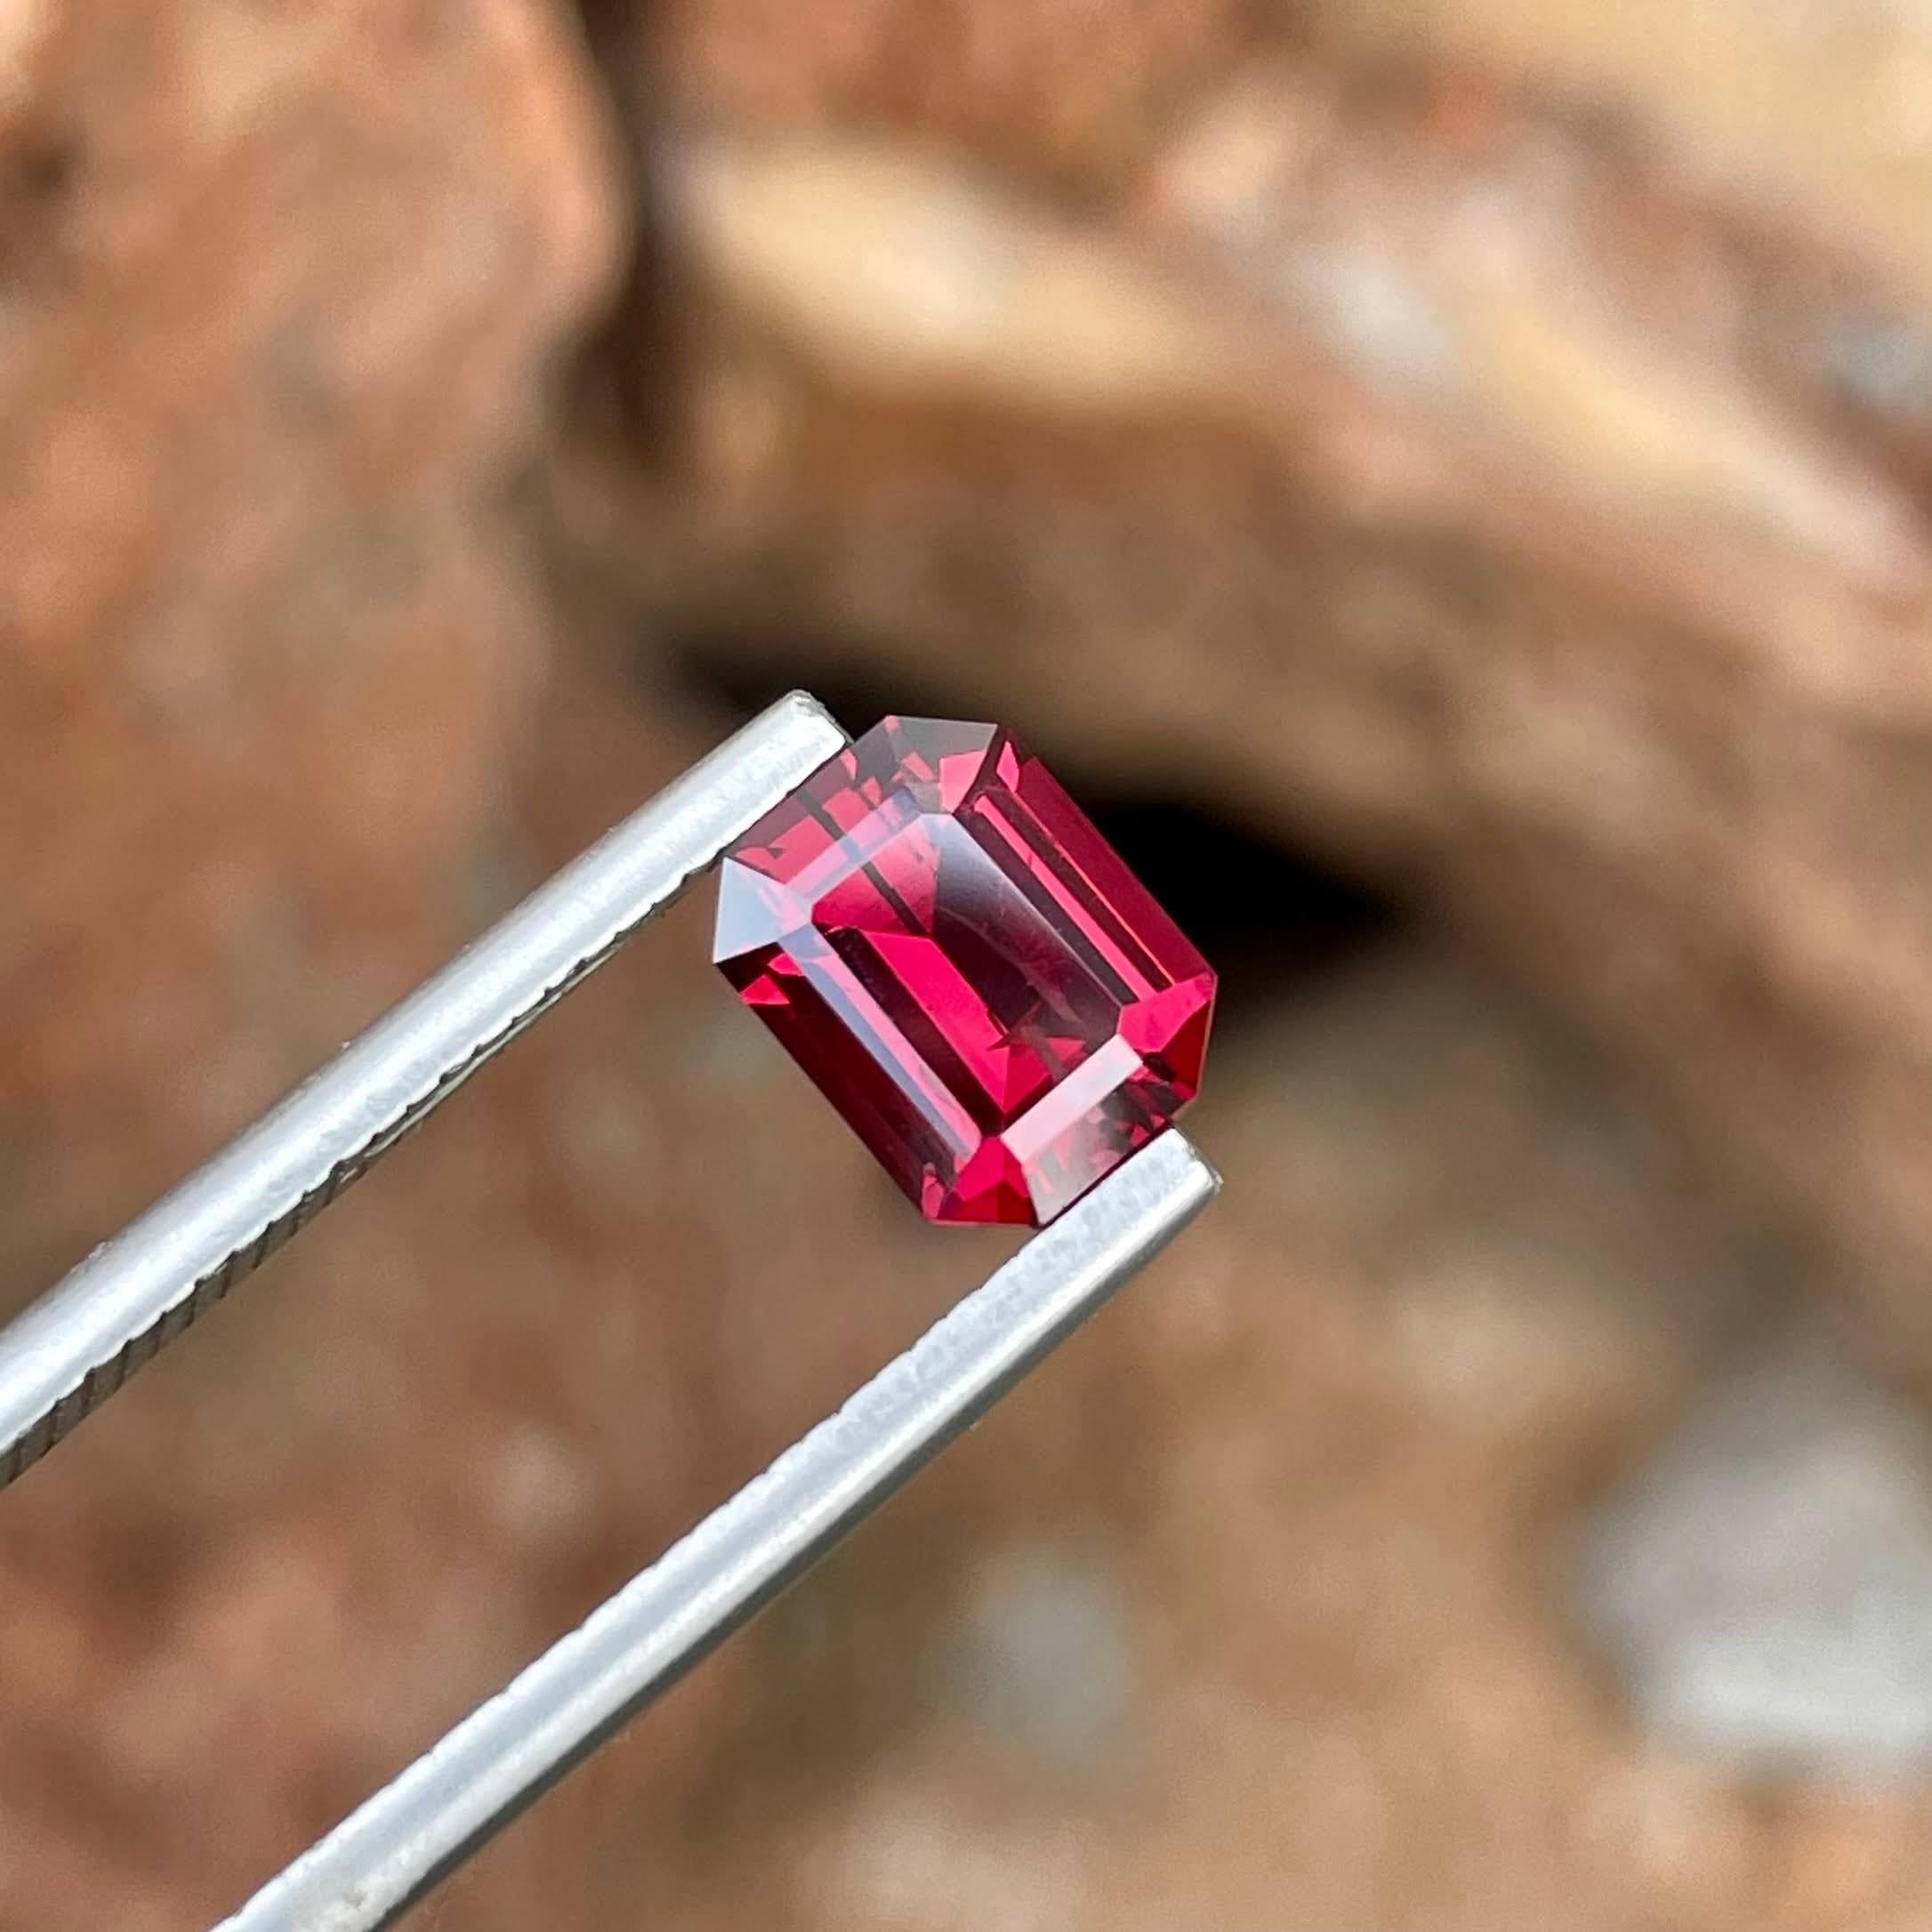 Weight 1.95 carats 
Dimensions 8.15x6.20x4.2 mm
Treatment none 
Origin Africa 
Clarity VVS
Shape octagon 
Cut emerald 




The 1.95 carats Bright Red Garnet Stone is a mesmerizing example of natural African gemstone beauty. Cut in the elegant